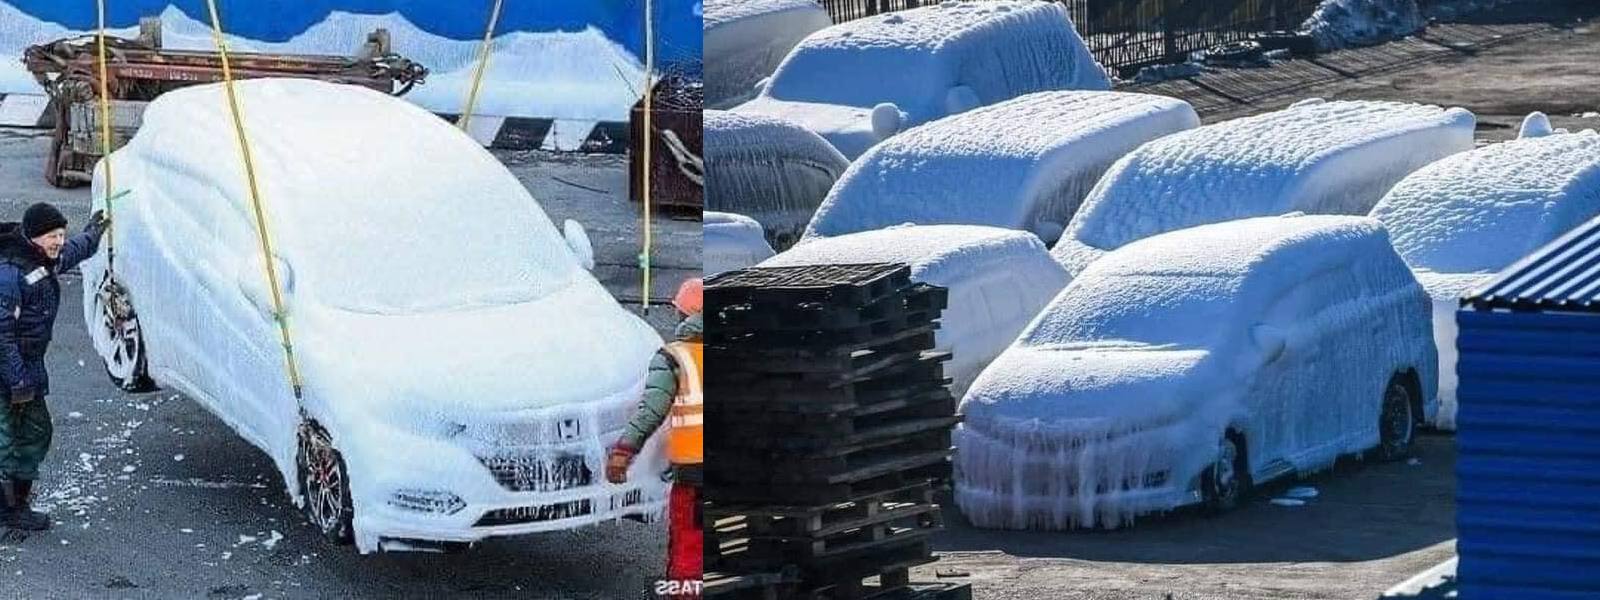 New cars delivered to Russian port caked in ice